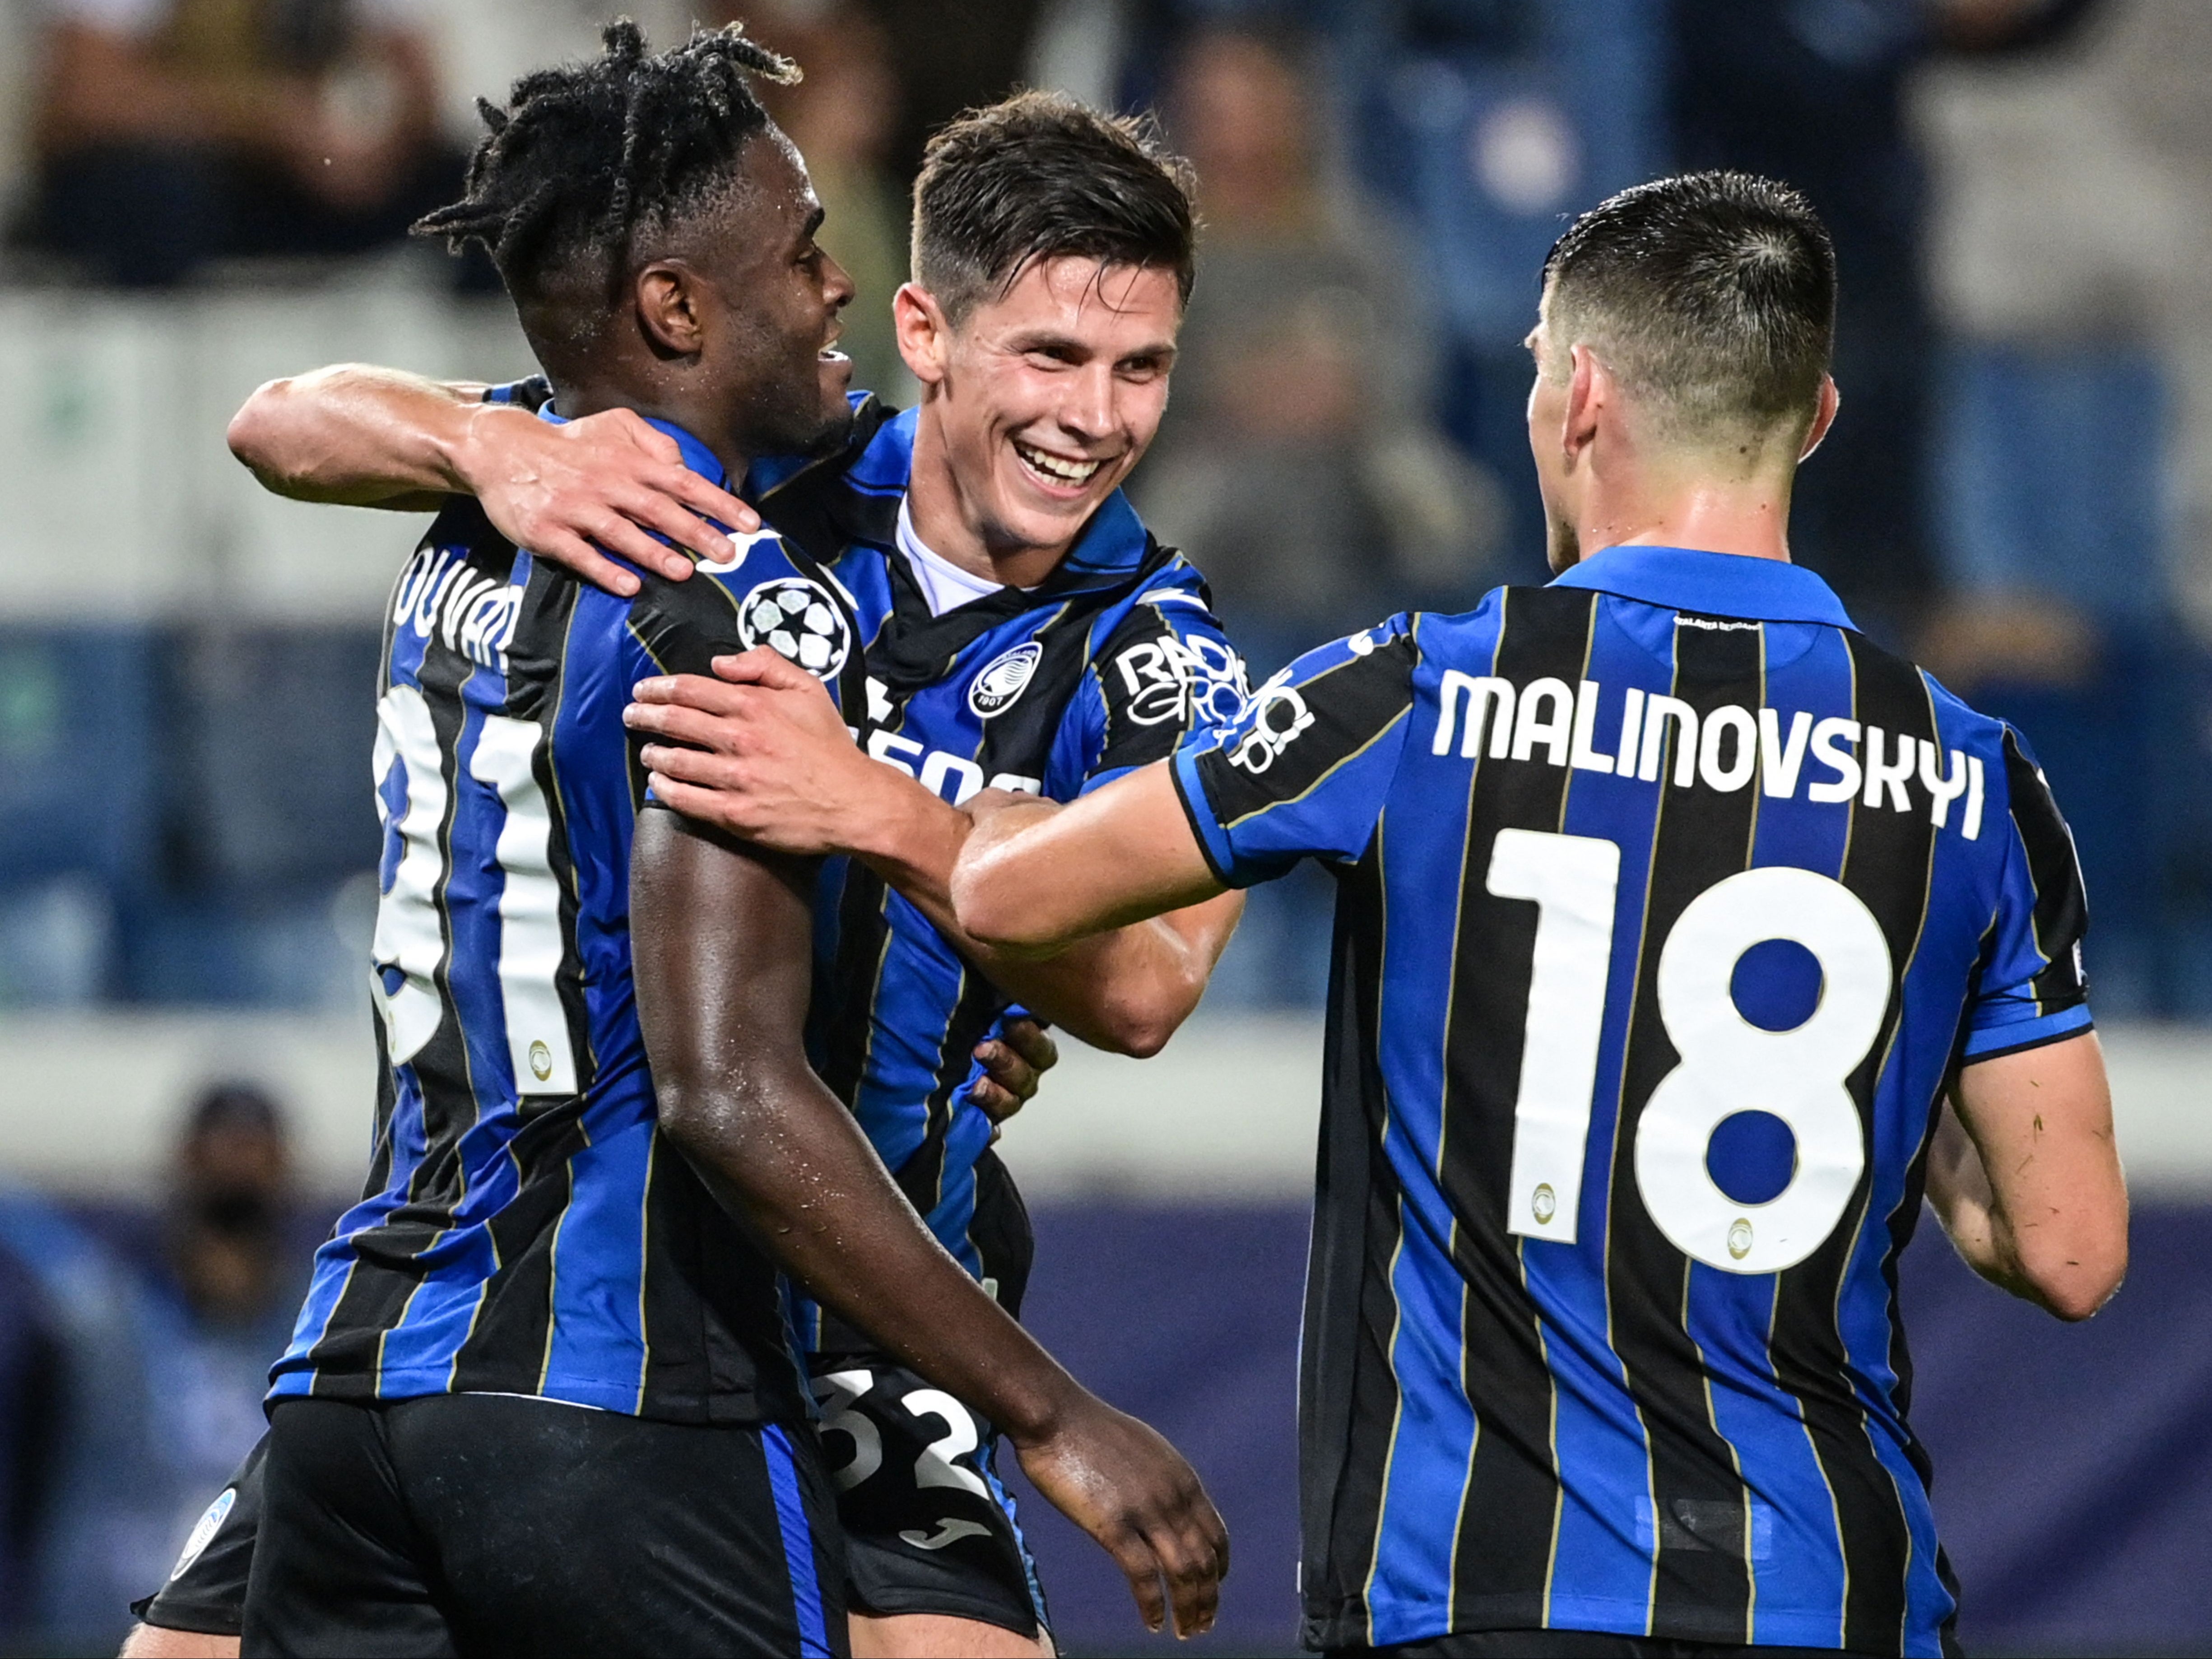 If Manchester United are less than the sum of their parts, Atalanta are ...